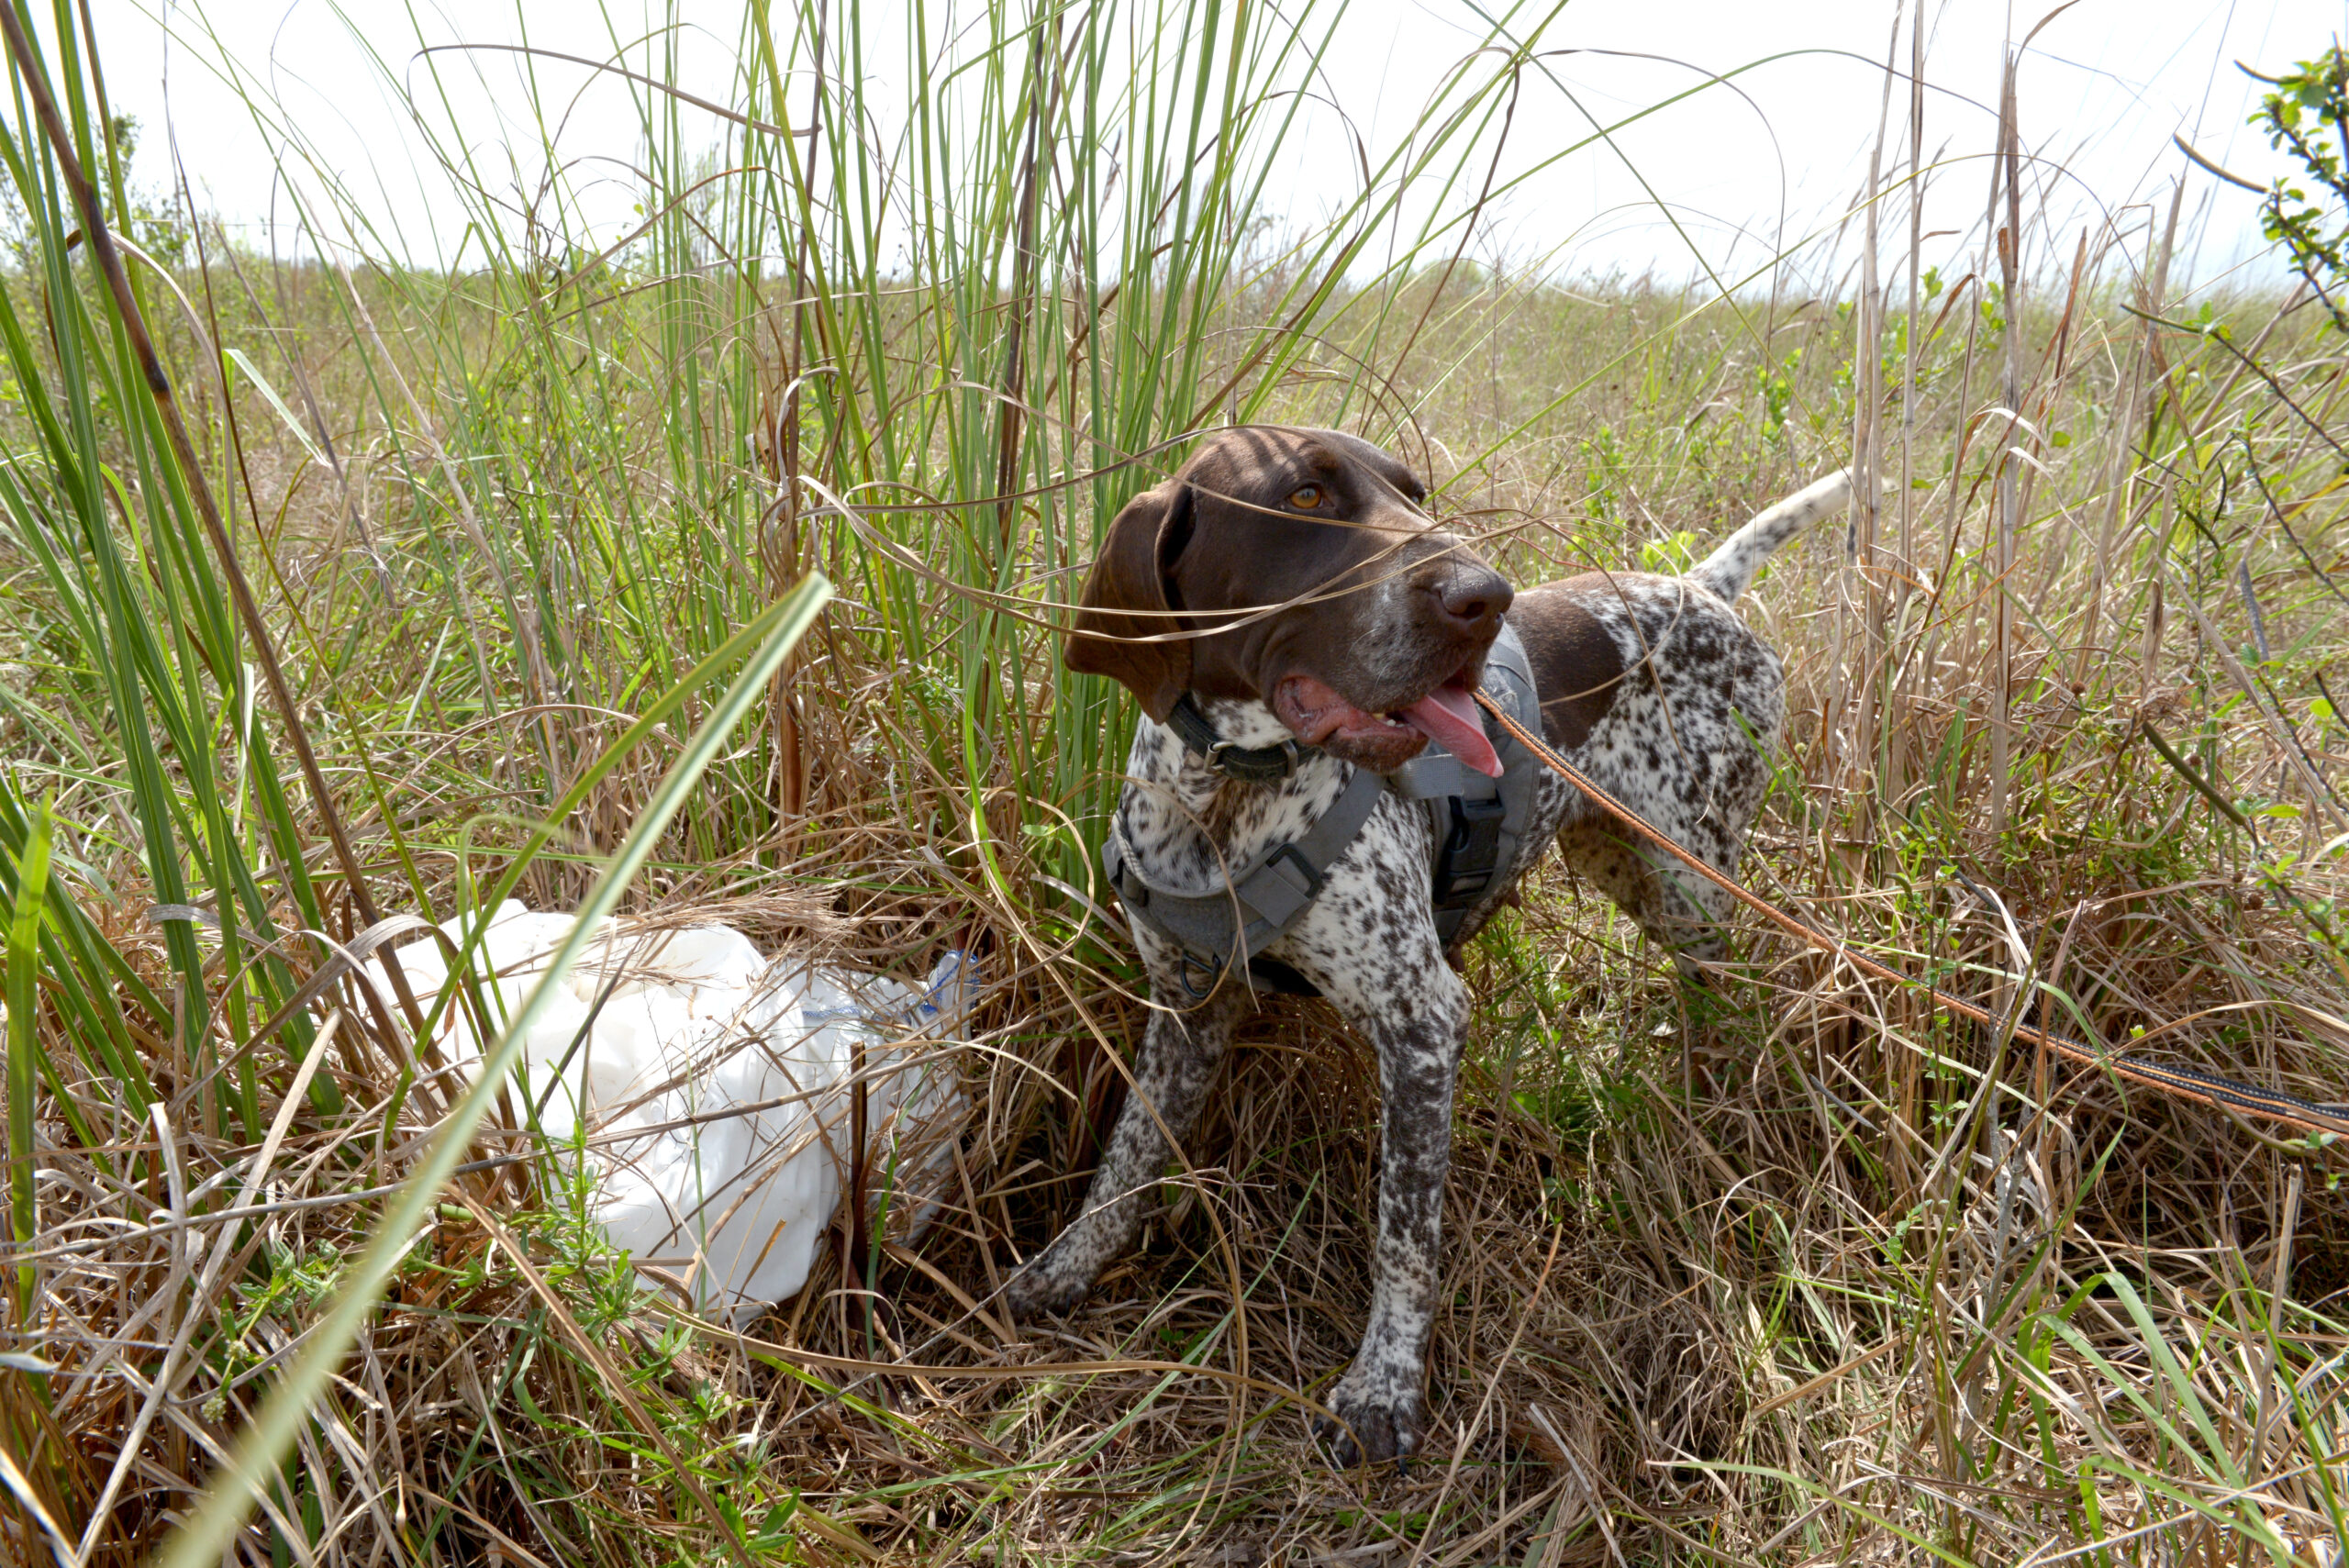 A brown and white spotted dog on a leash is searching among tall grasses.